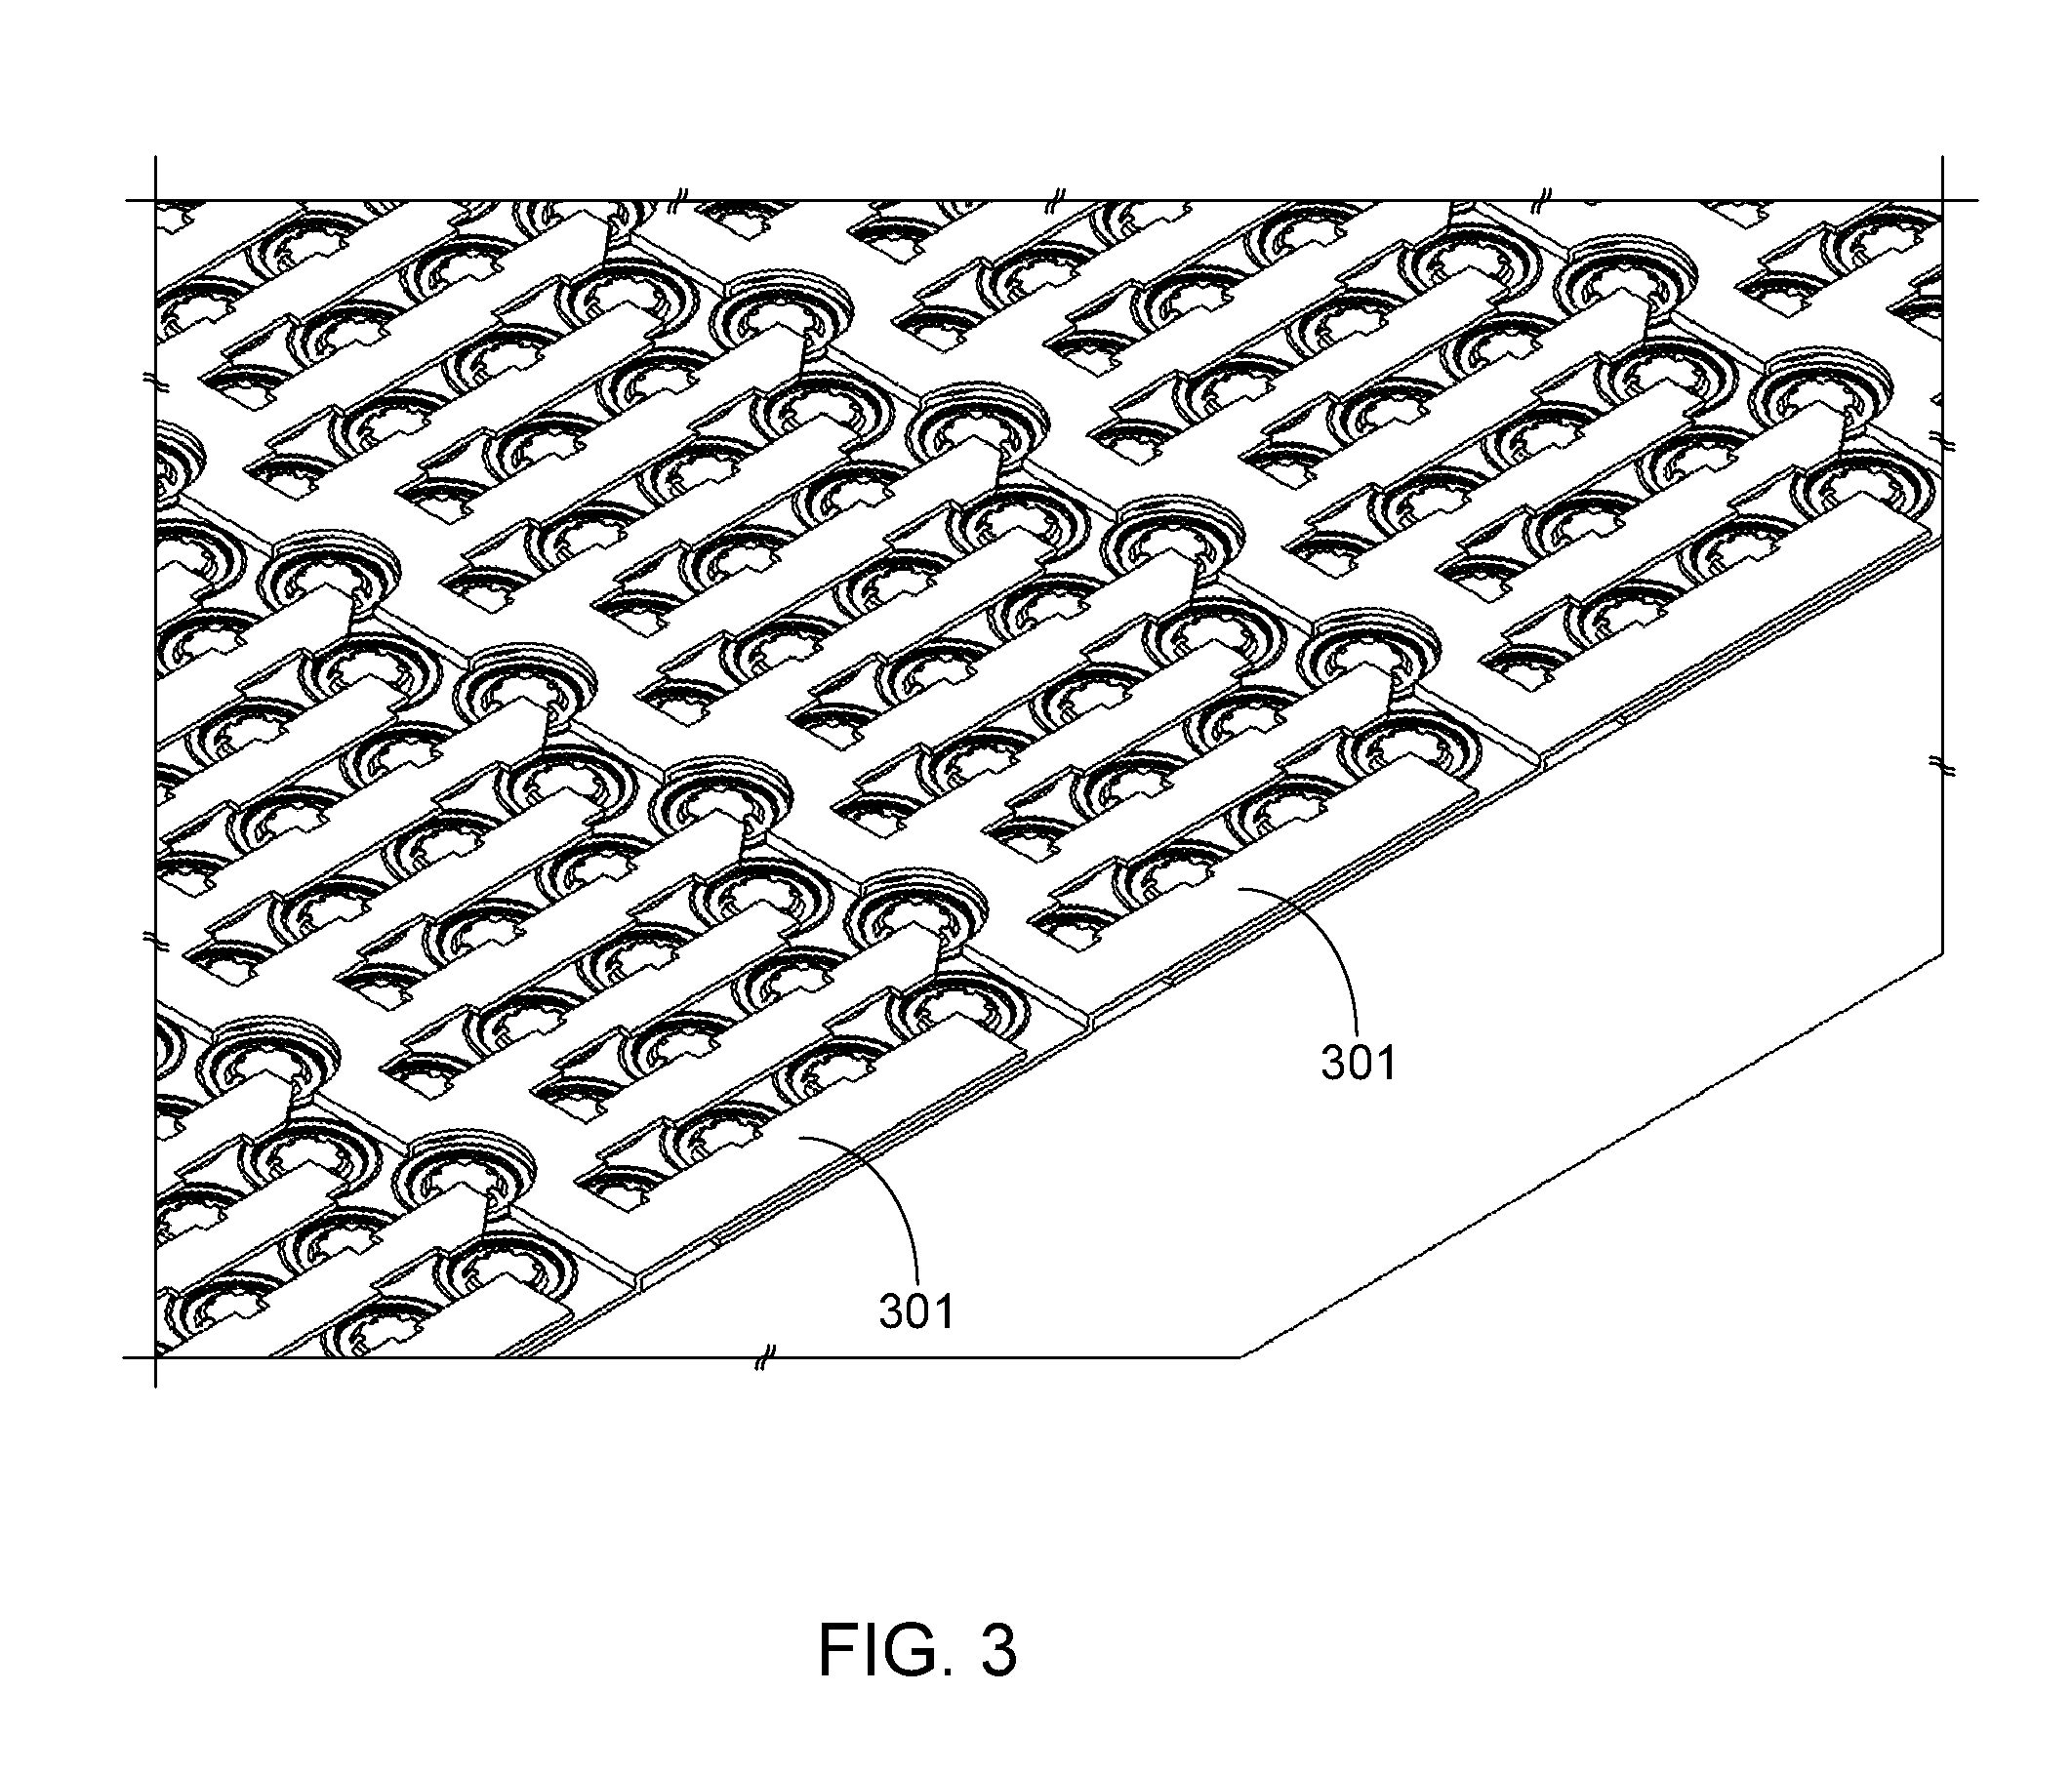 Battery Assembly with Linear Bus Bar Configuration